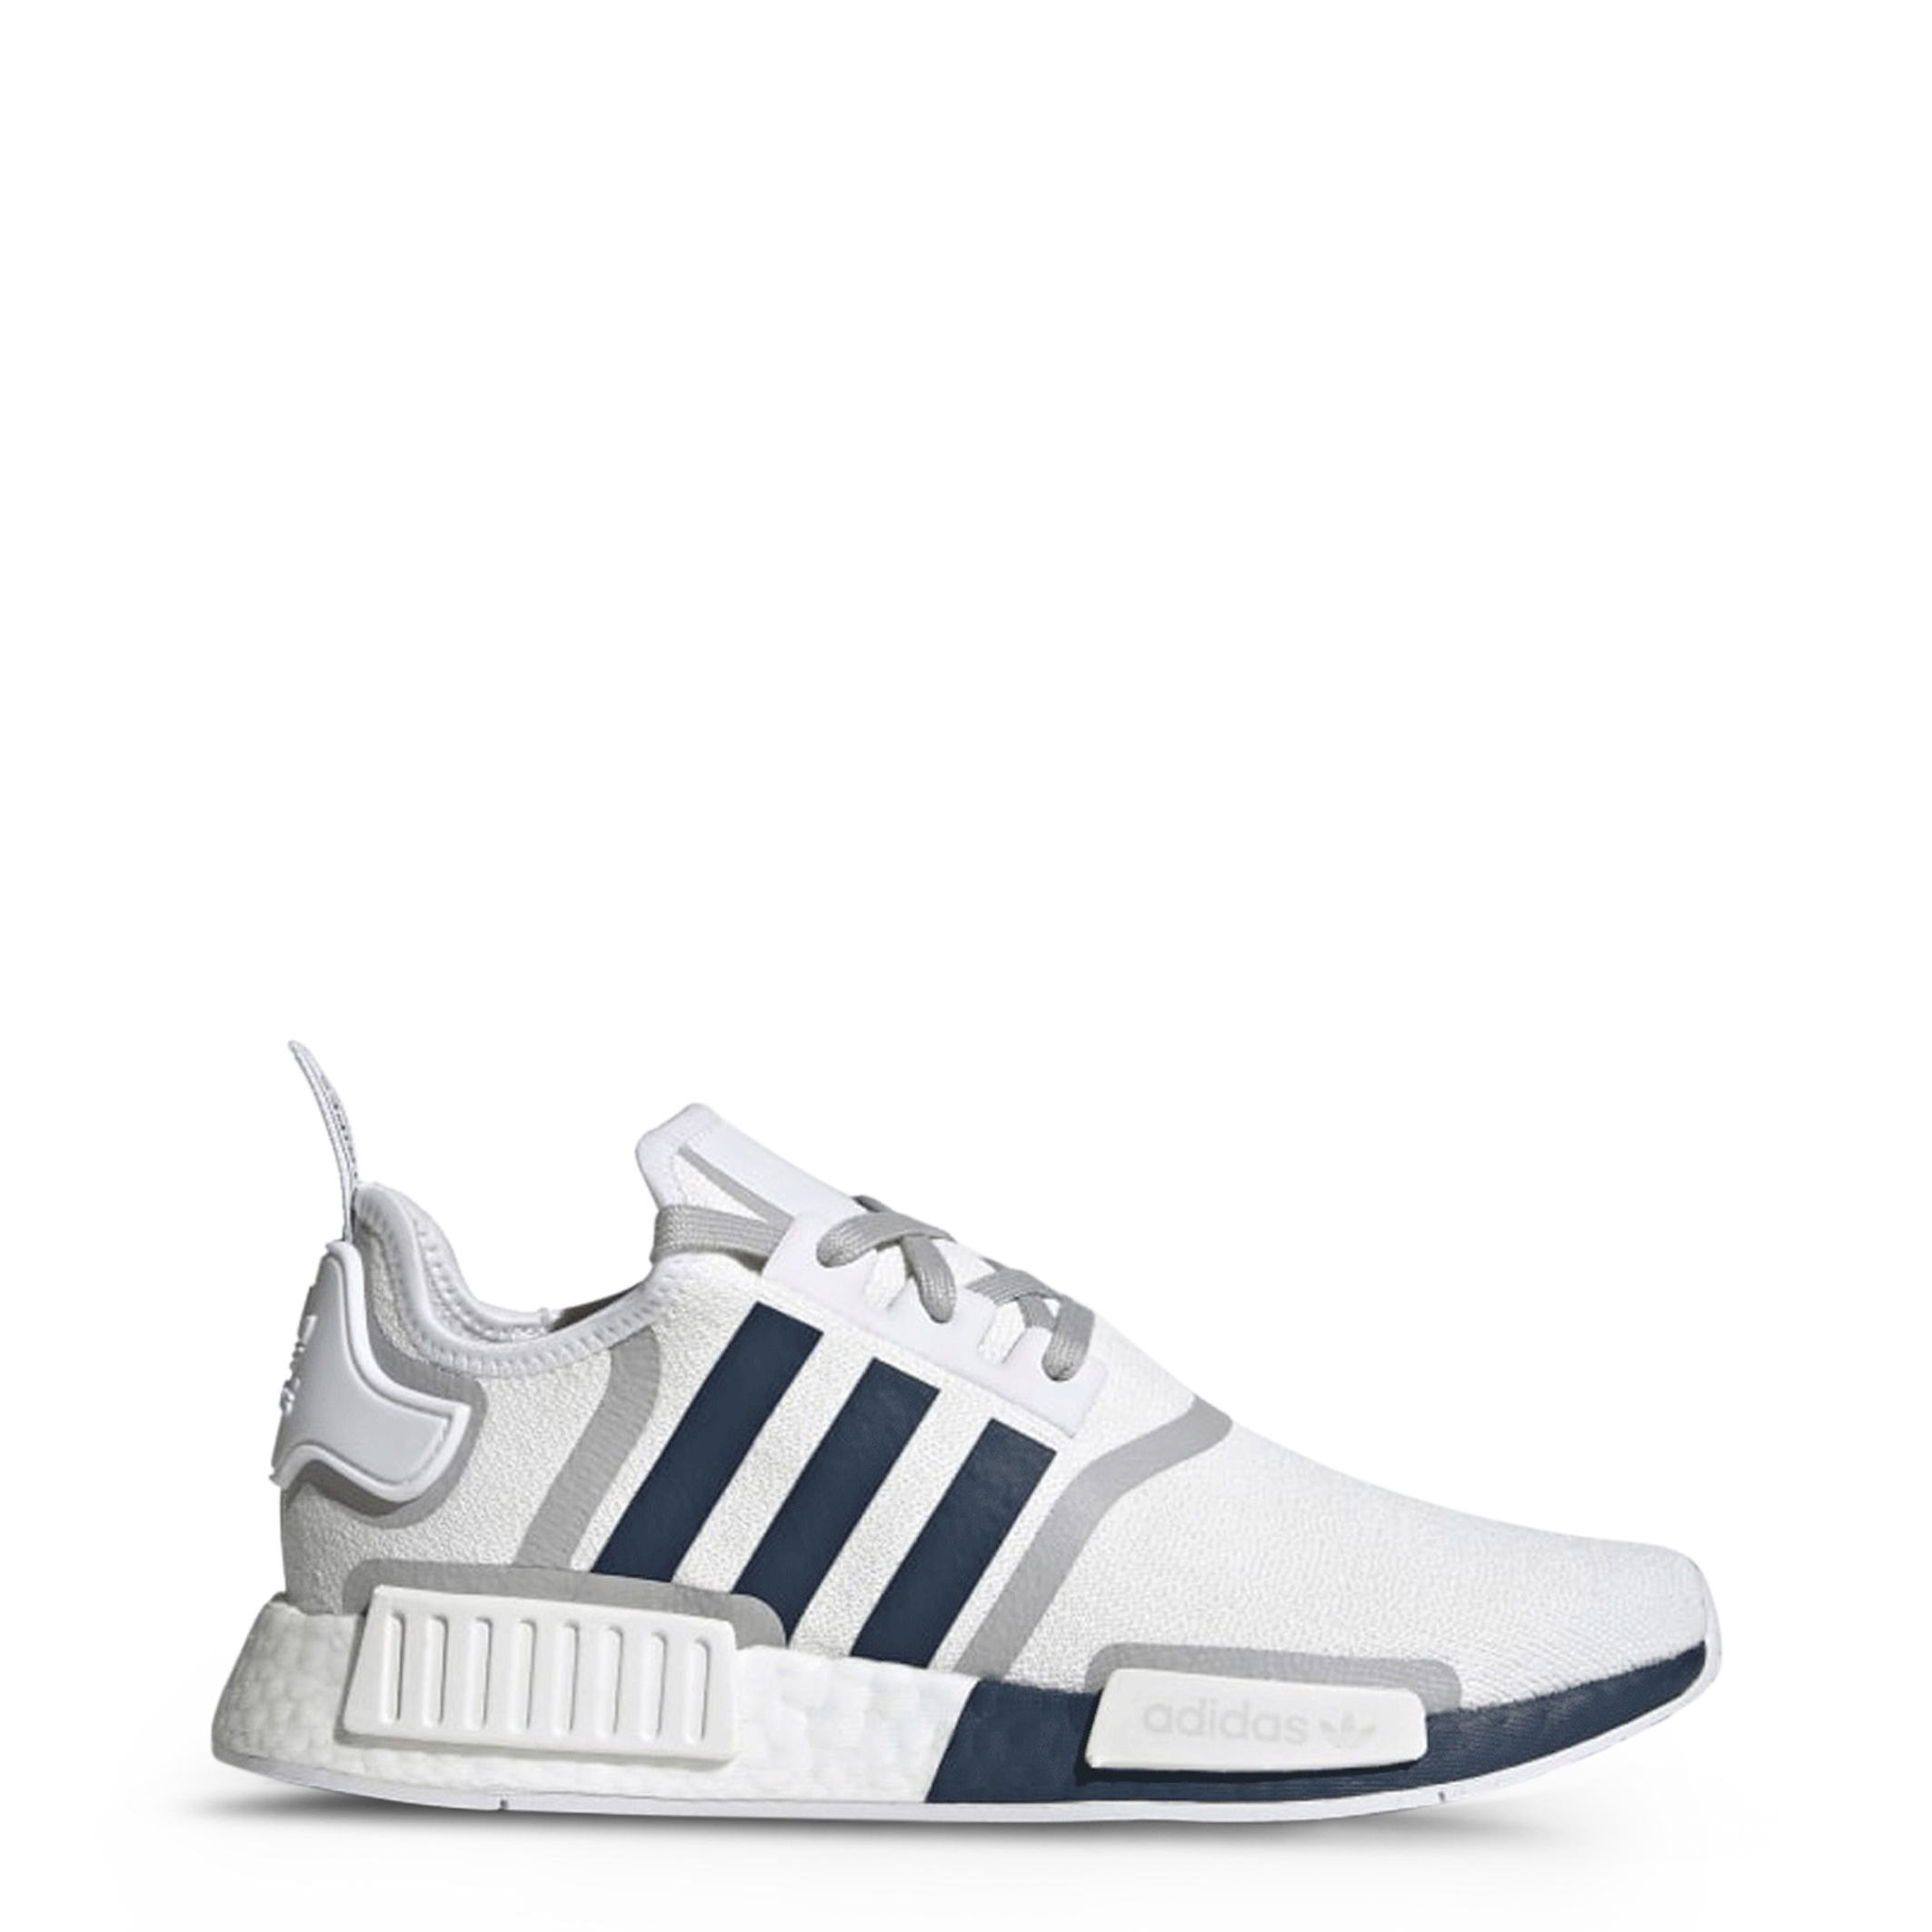 nmd in uk